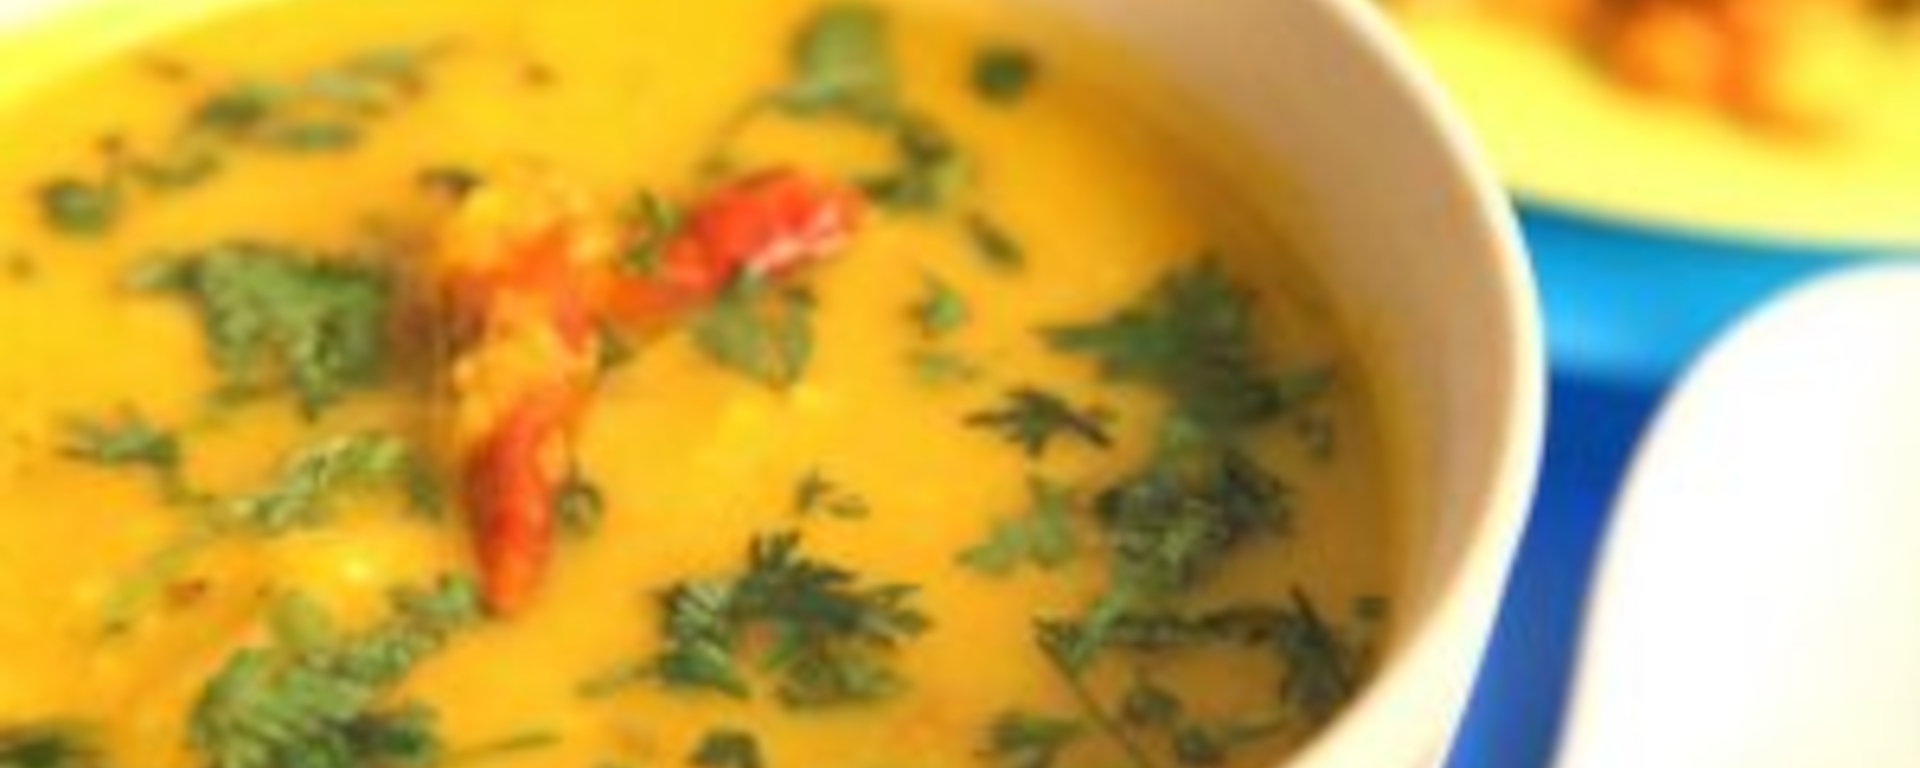 LuvMyRecipe.com - Easy Cooking: Tuvar Daal Featured